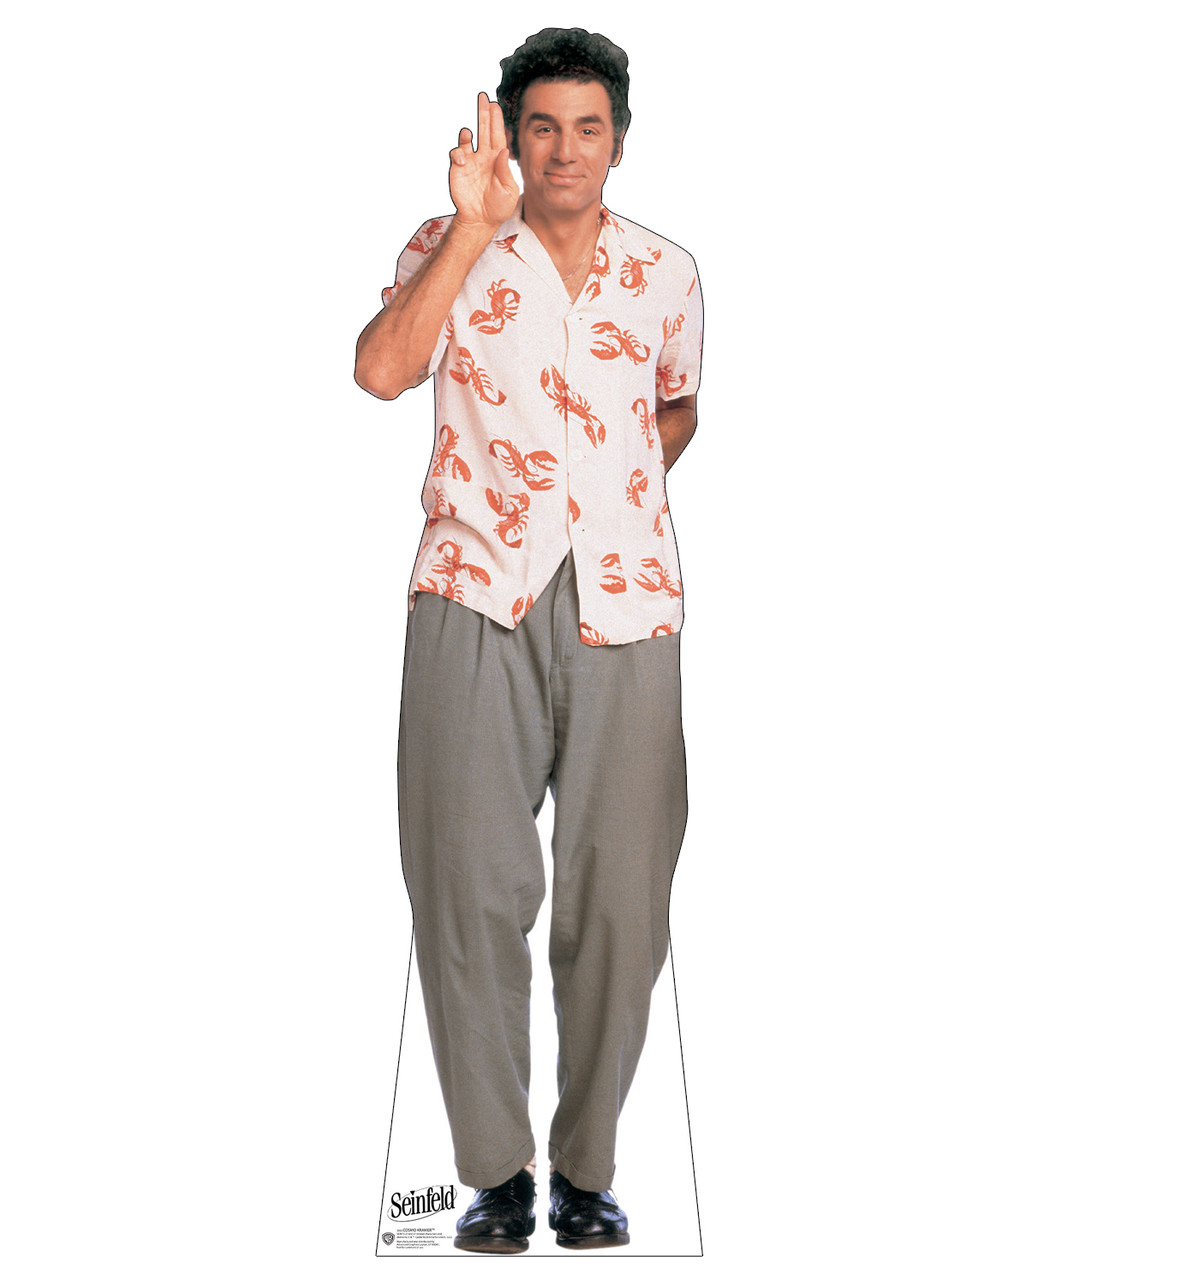 Life-size cardboard standee of Cosmo Kramer from the Hit TV Series Seinfeld.